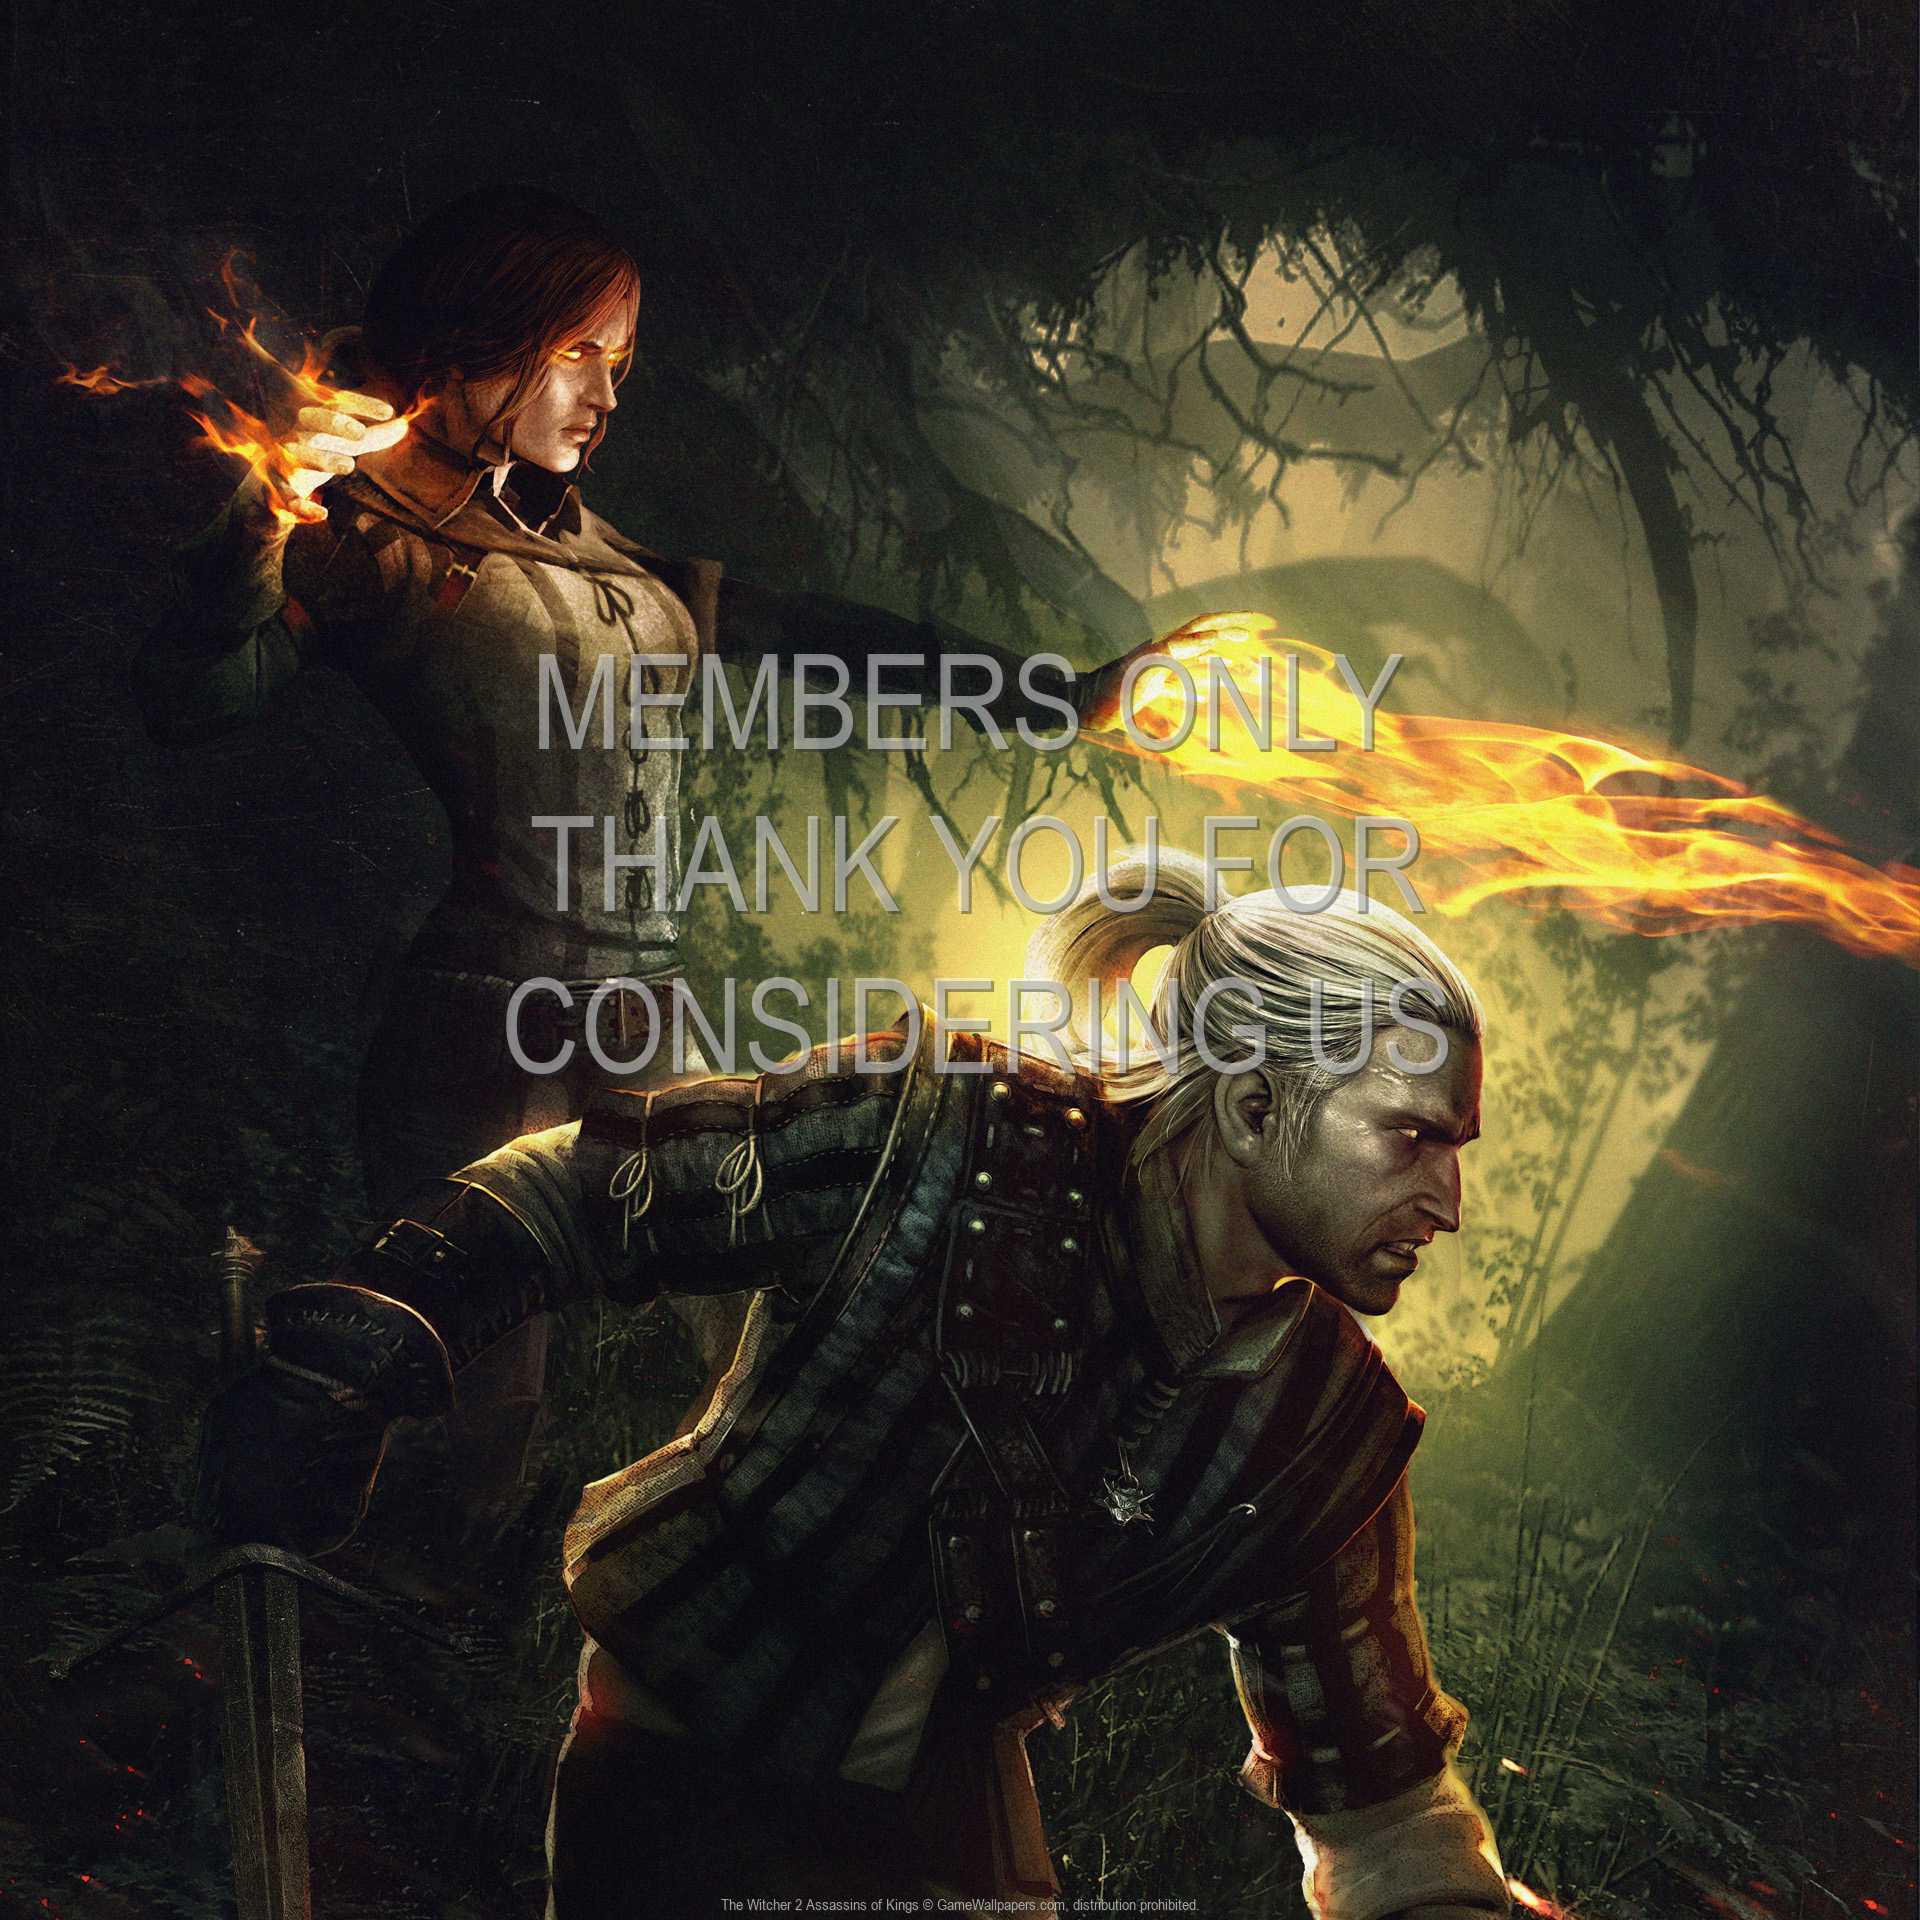 The Witcher 2: Assassins of Kings 1080p Horizontal Mobile fond d'cran 08